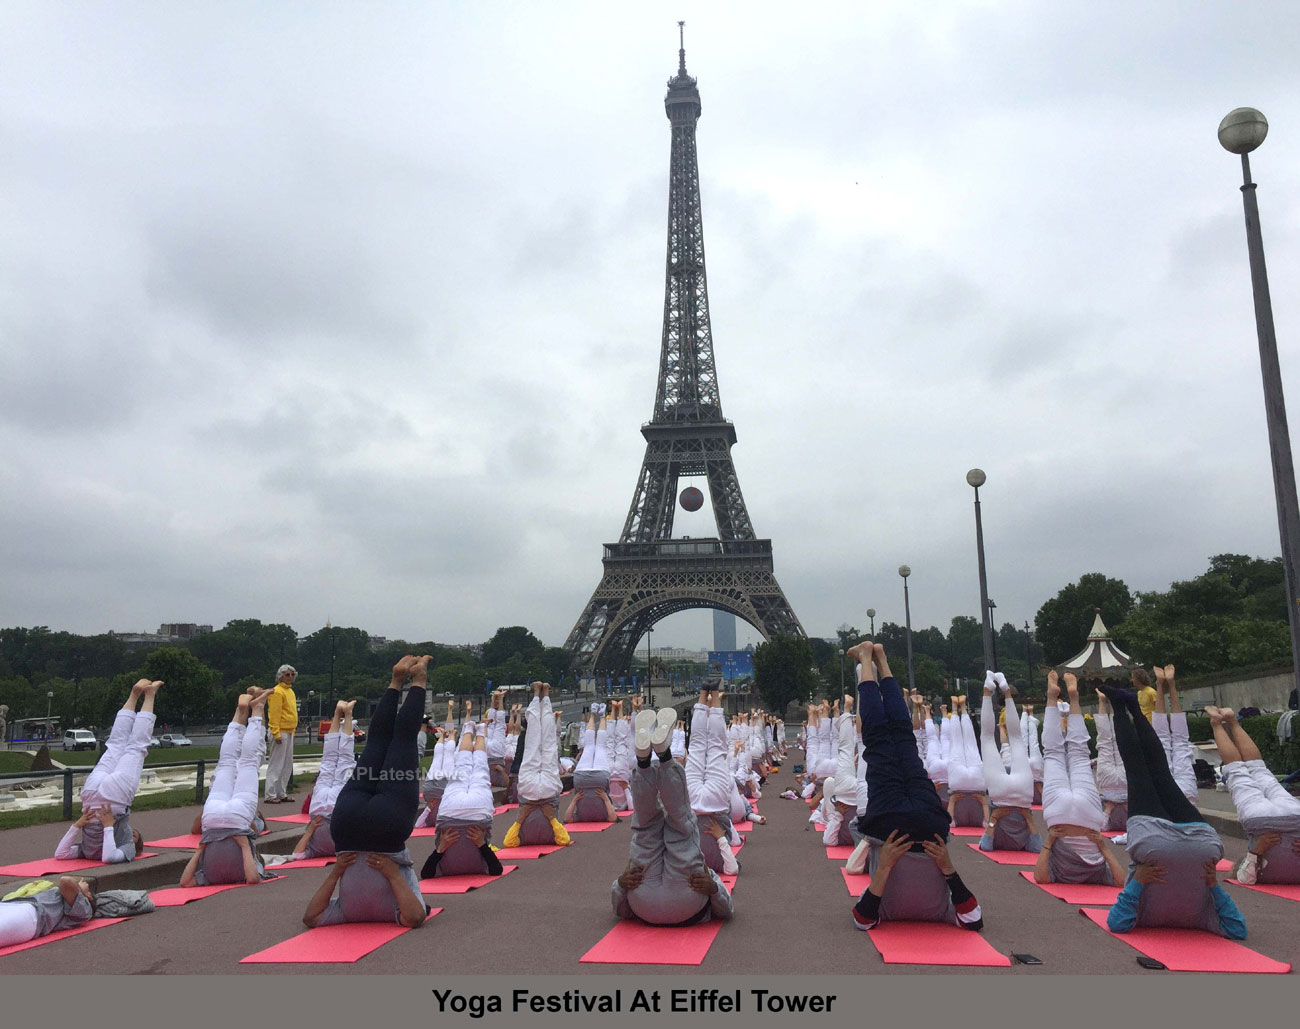 Euro Cup and Yoga Festival at Eiffel Tower Rocked Paris - Picture 7